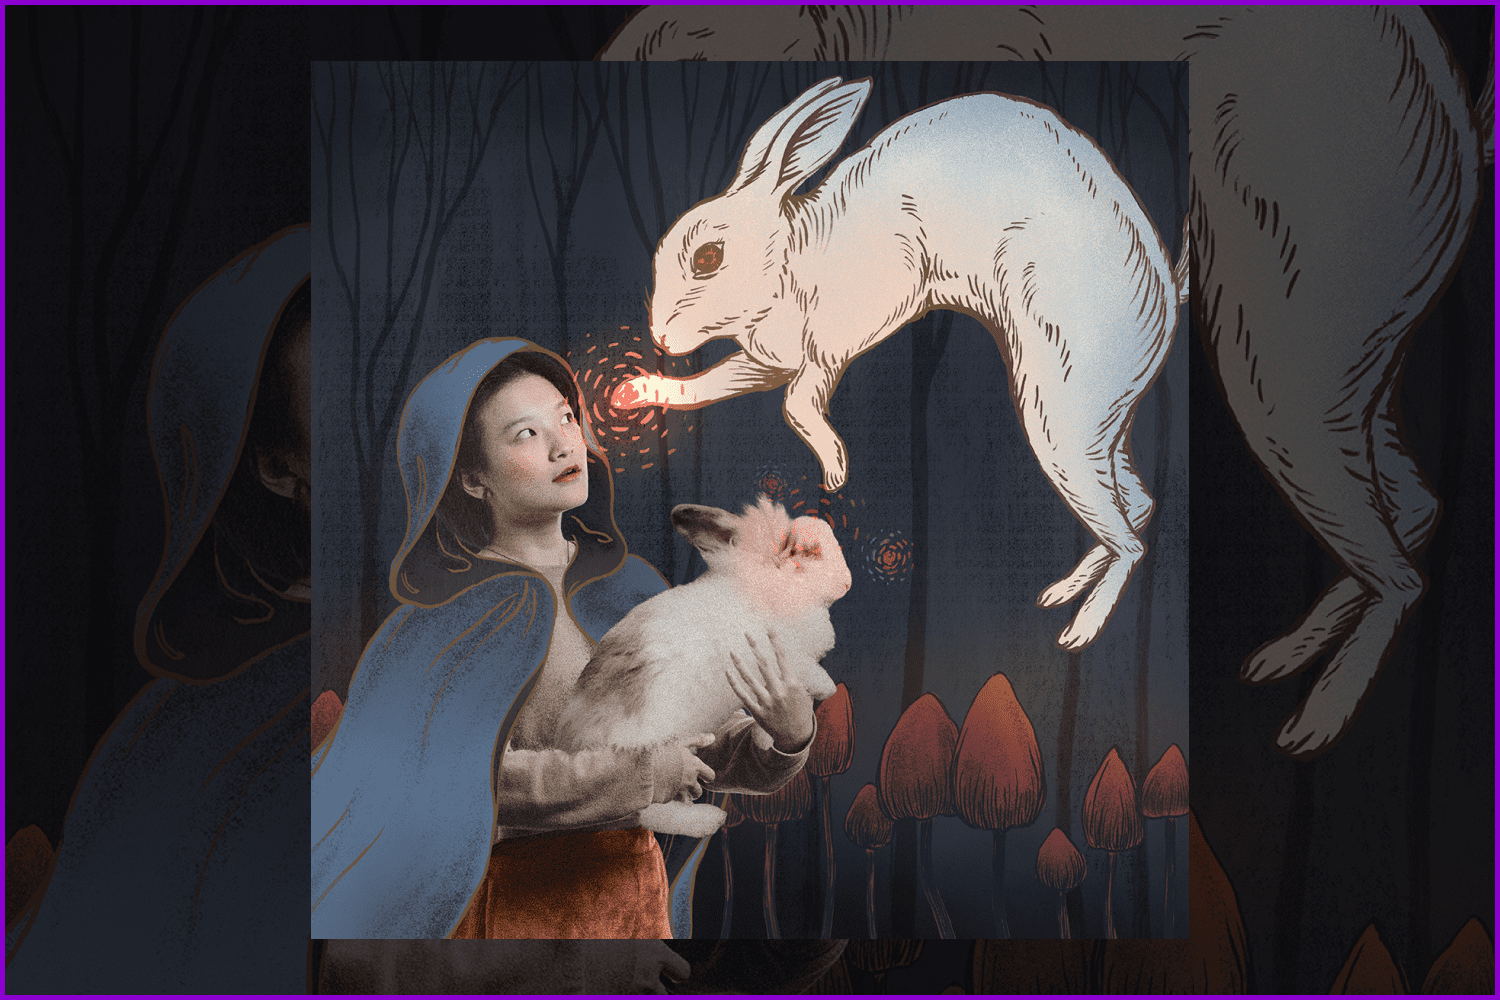 One of surreal illustrations is a girl holding a white rabbit in mantle in a tulip field.